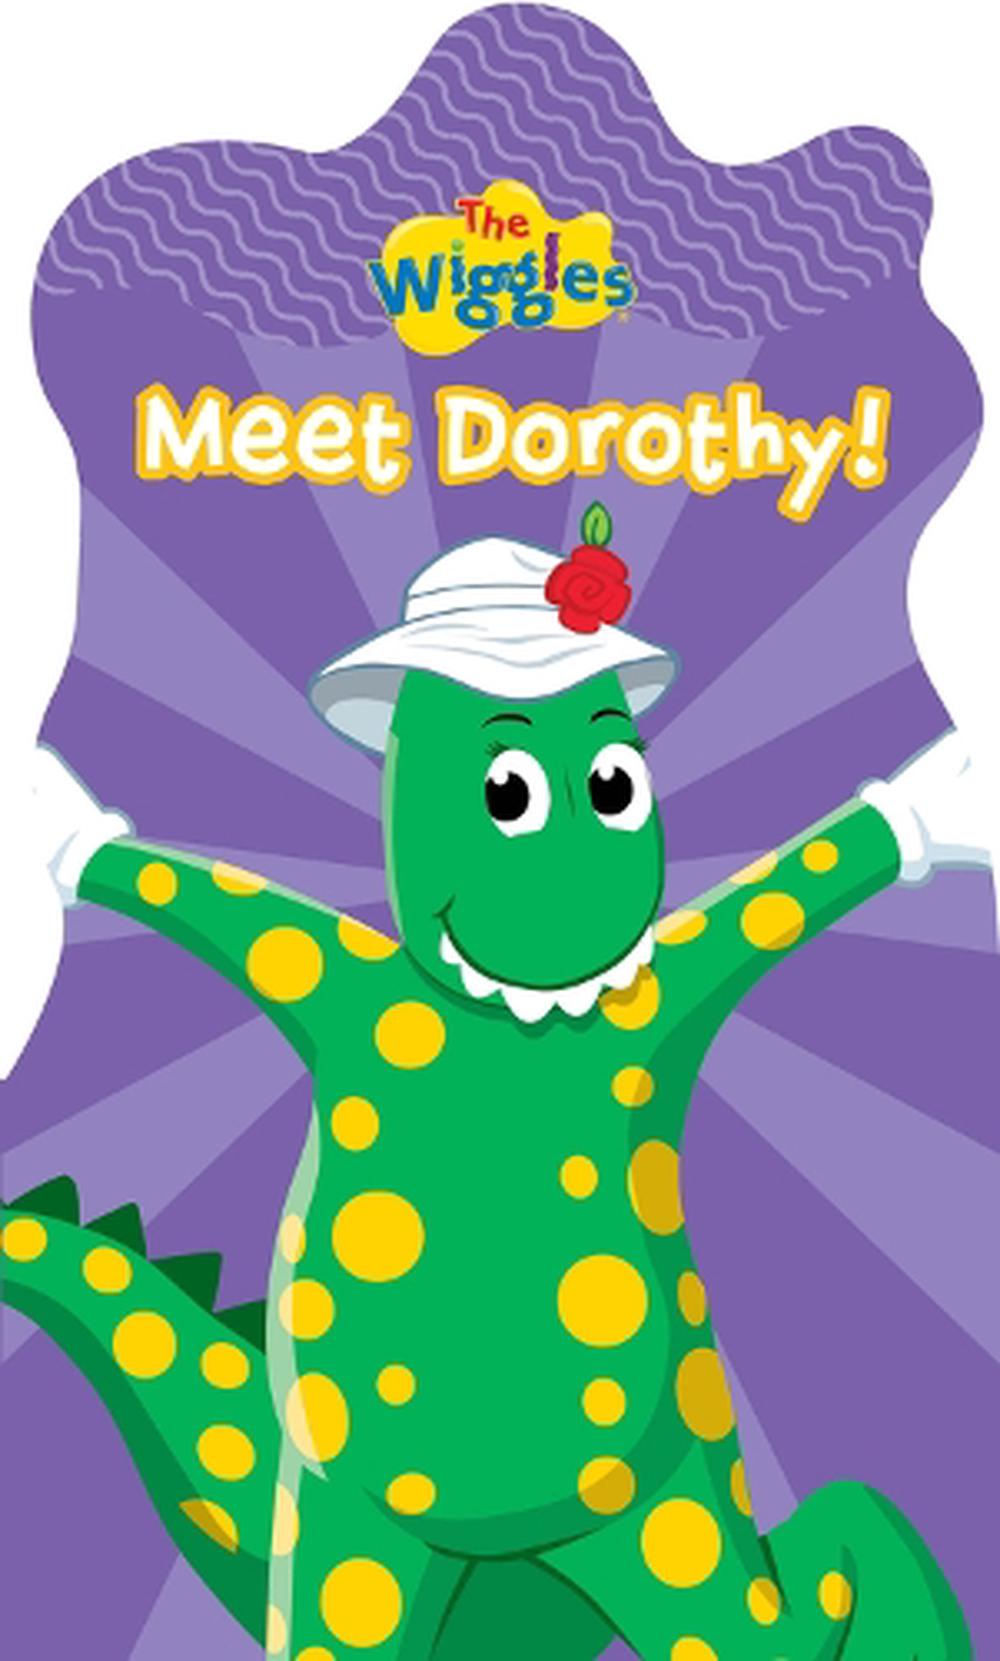 The Wiggles Meet Dorothy By The Wiggles Board Books 9781922857620